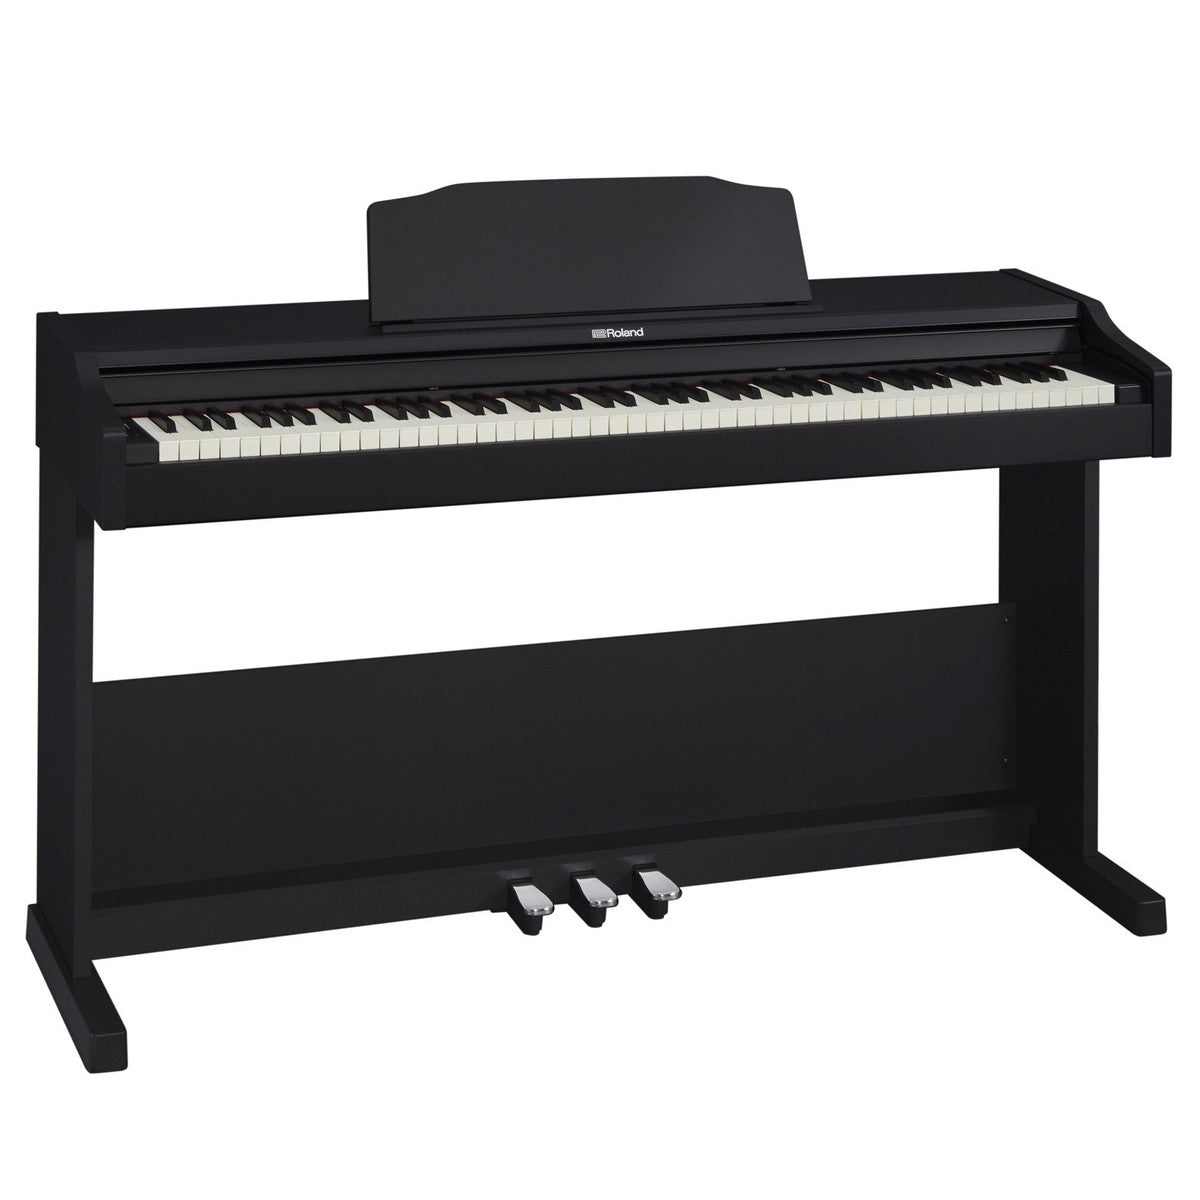 Piano Điện Roland